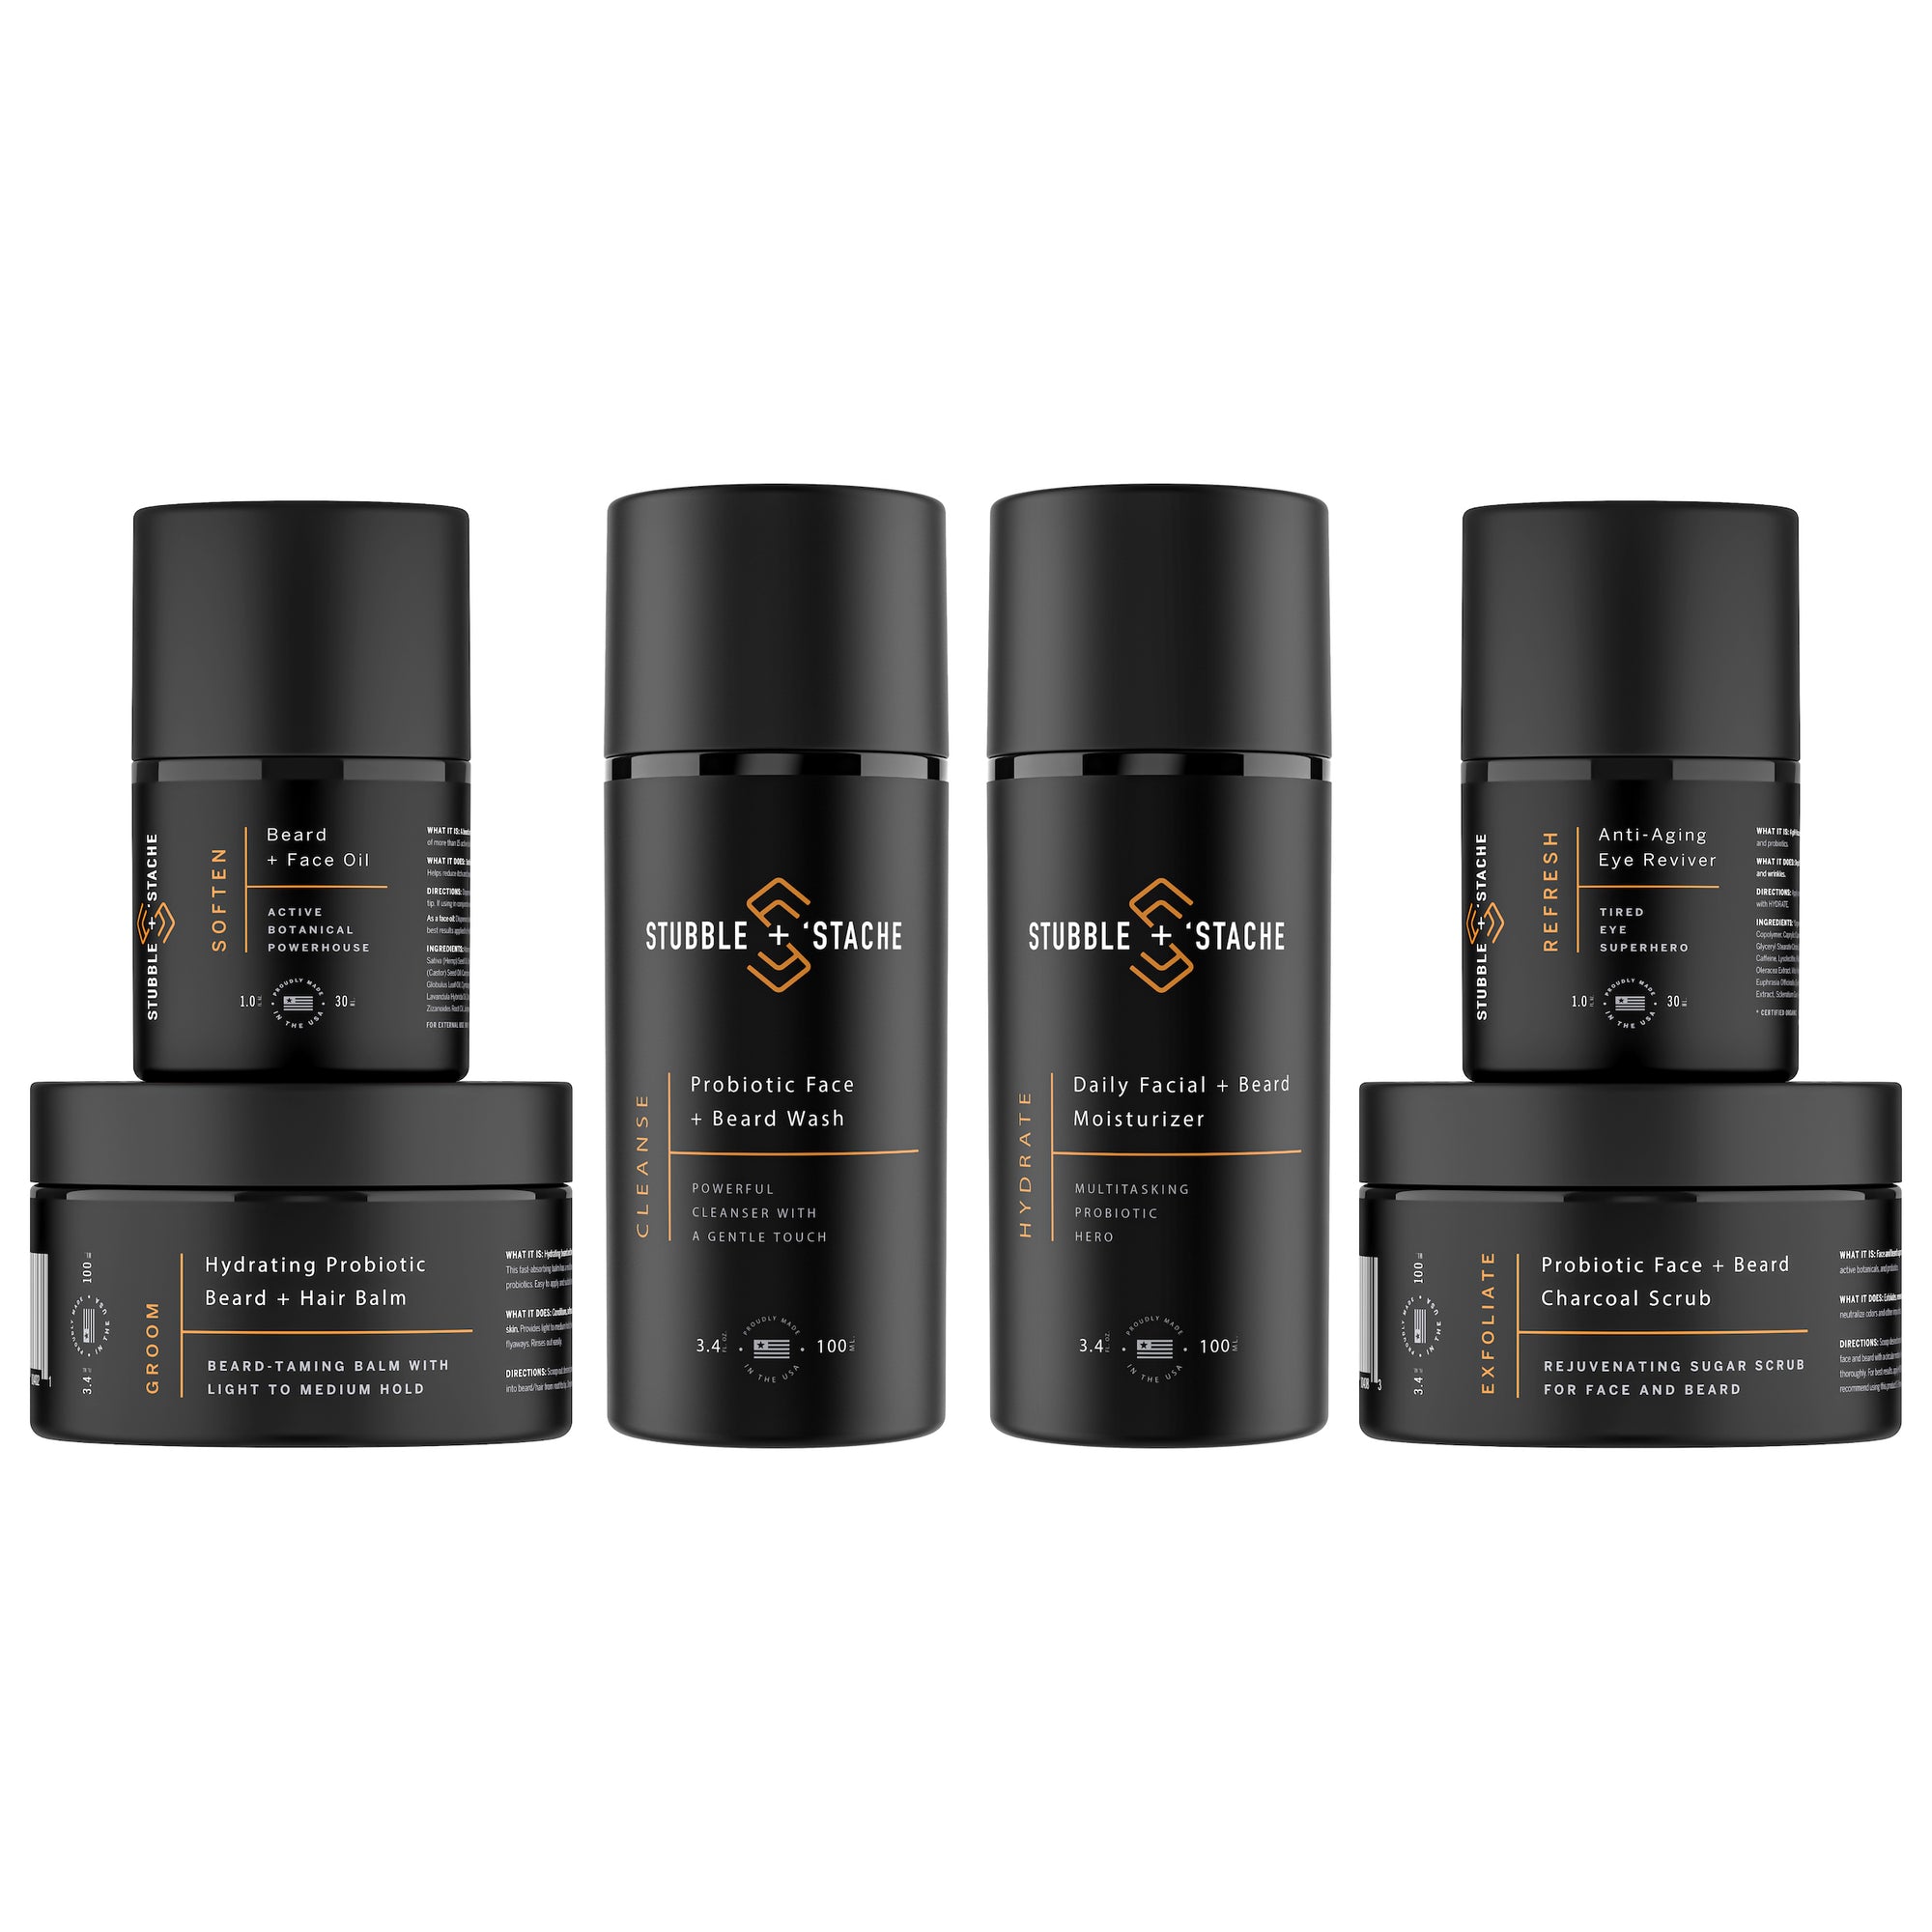 The Complete Men's skin care and beard care set